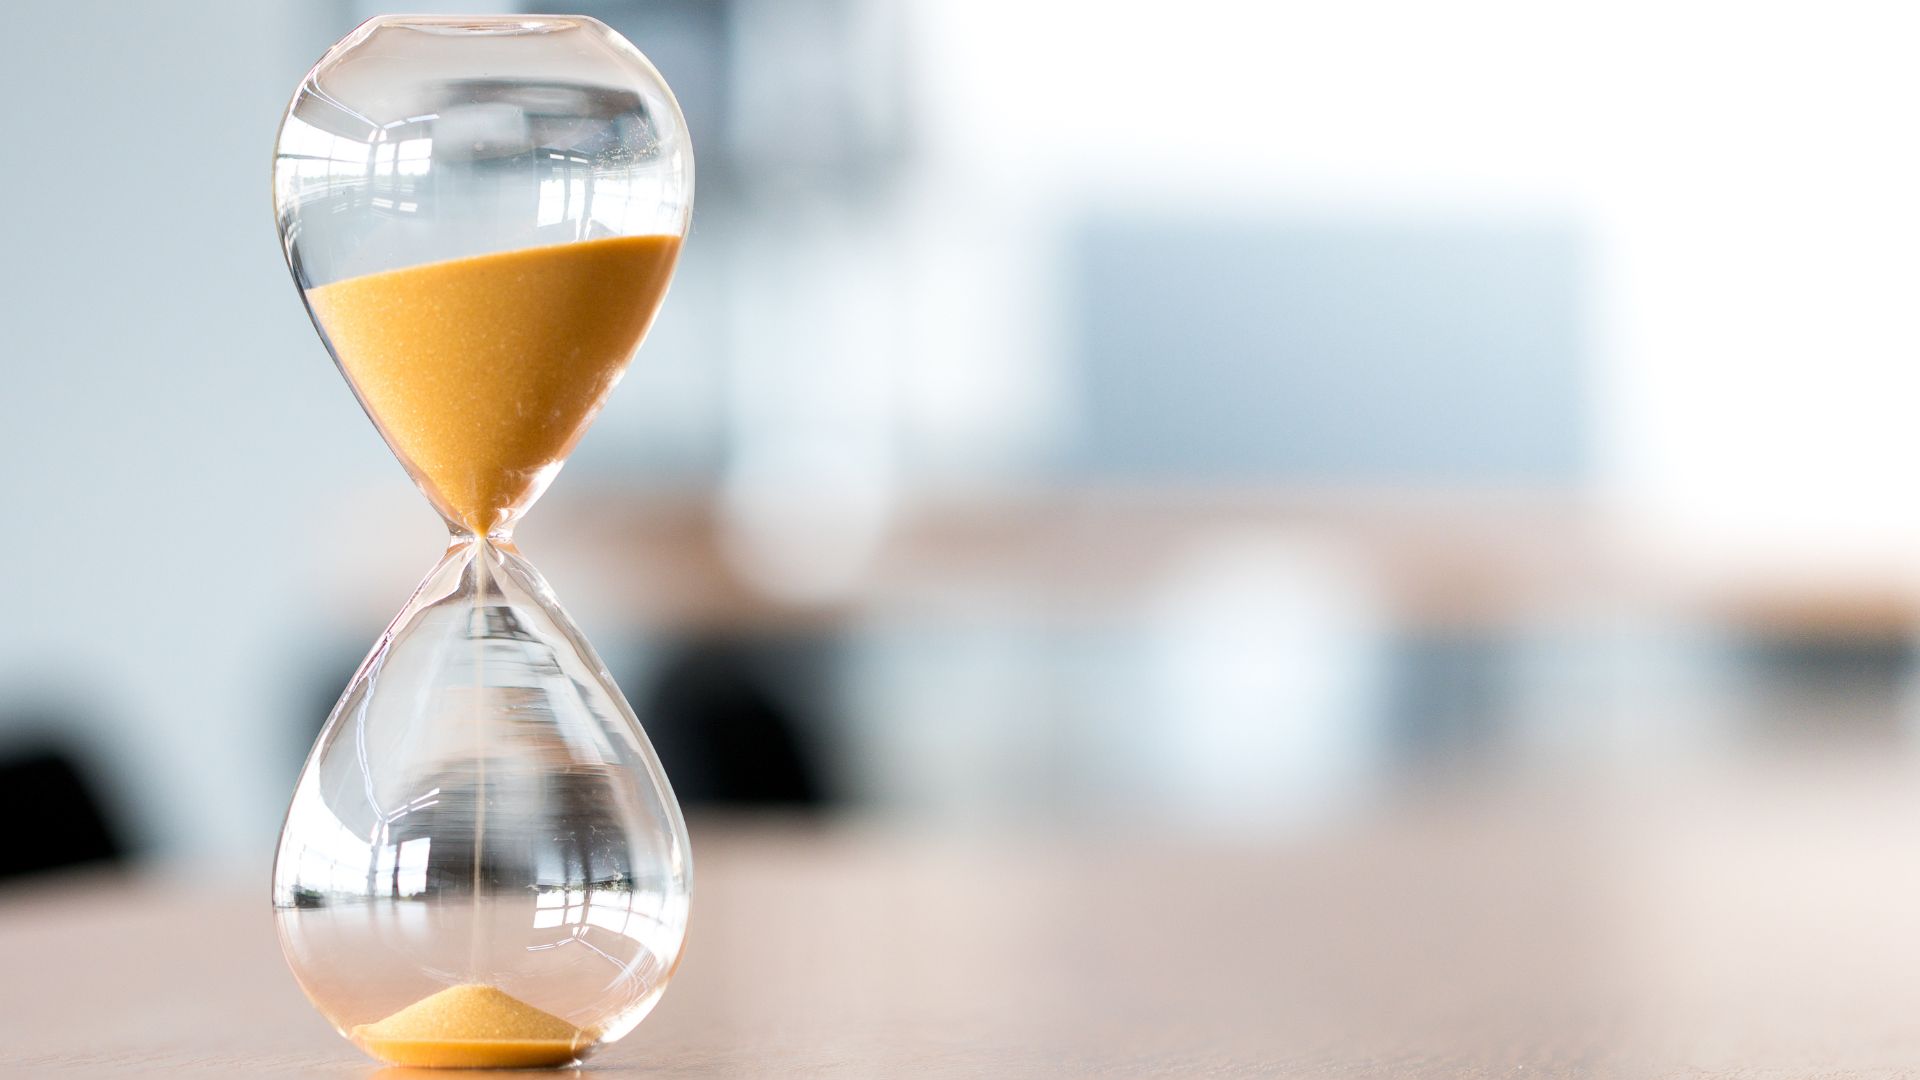 Are you making the most of your time as business owners?